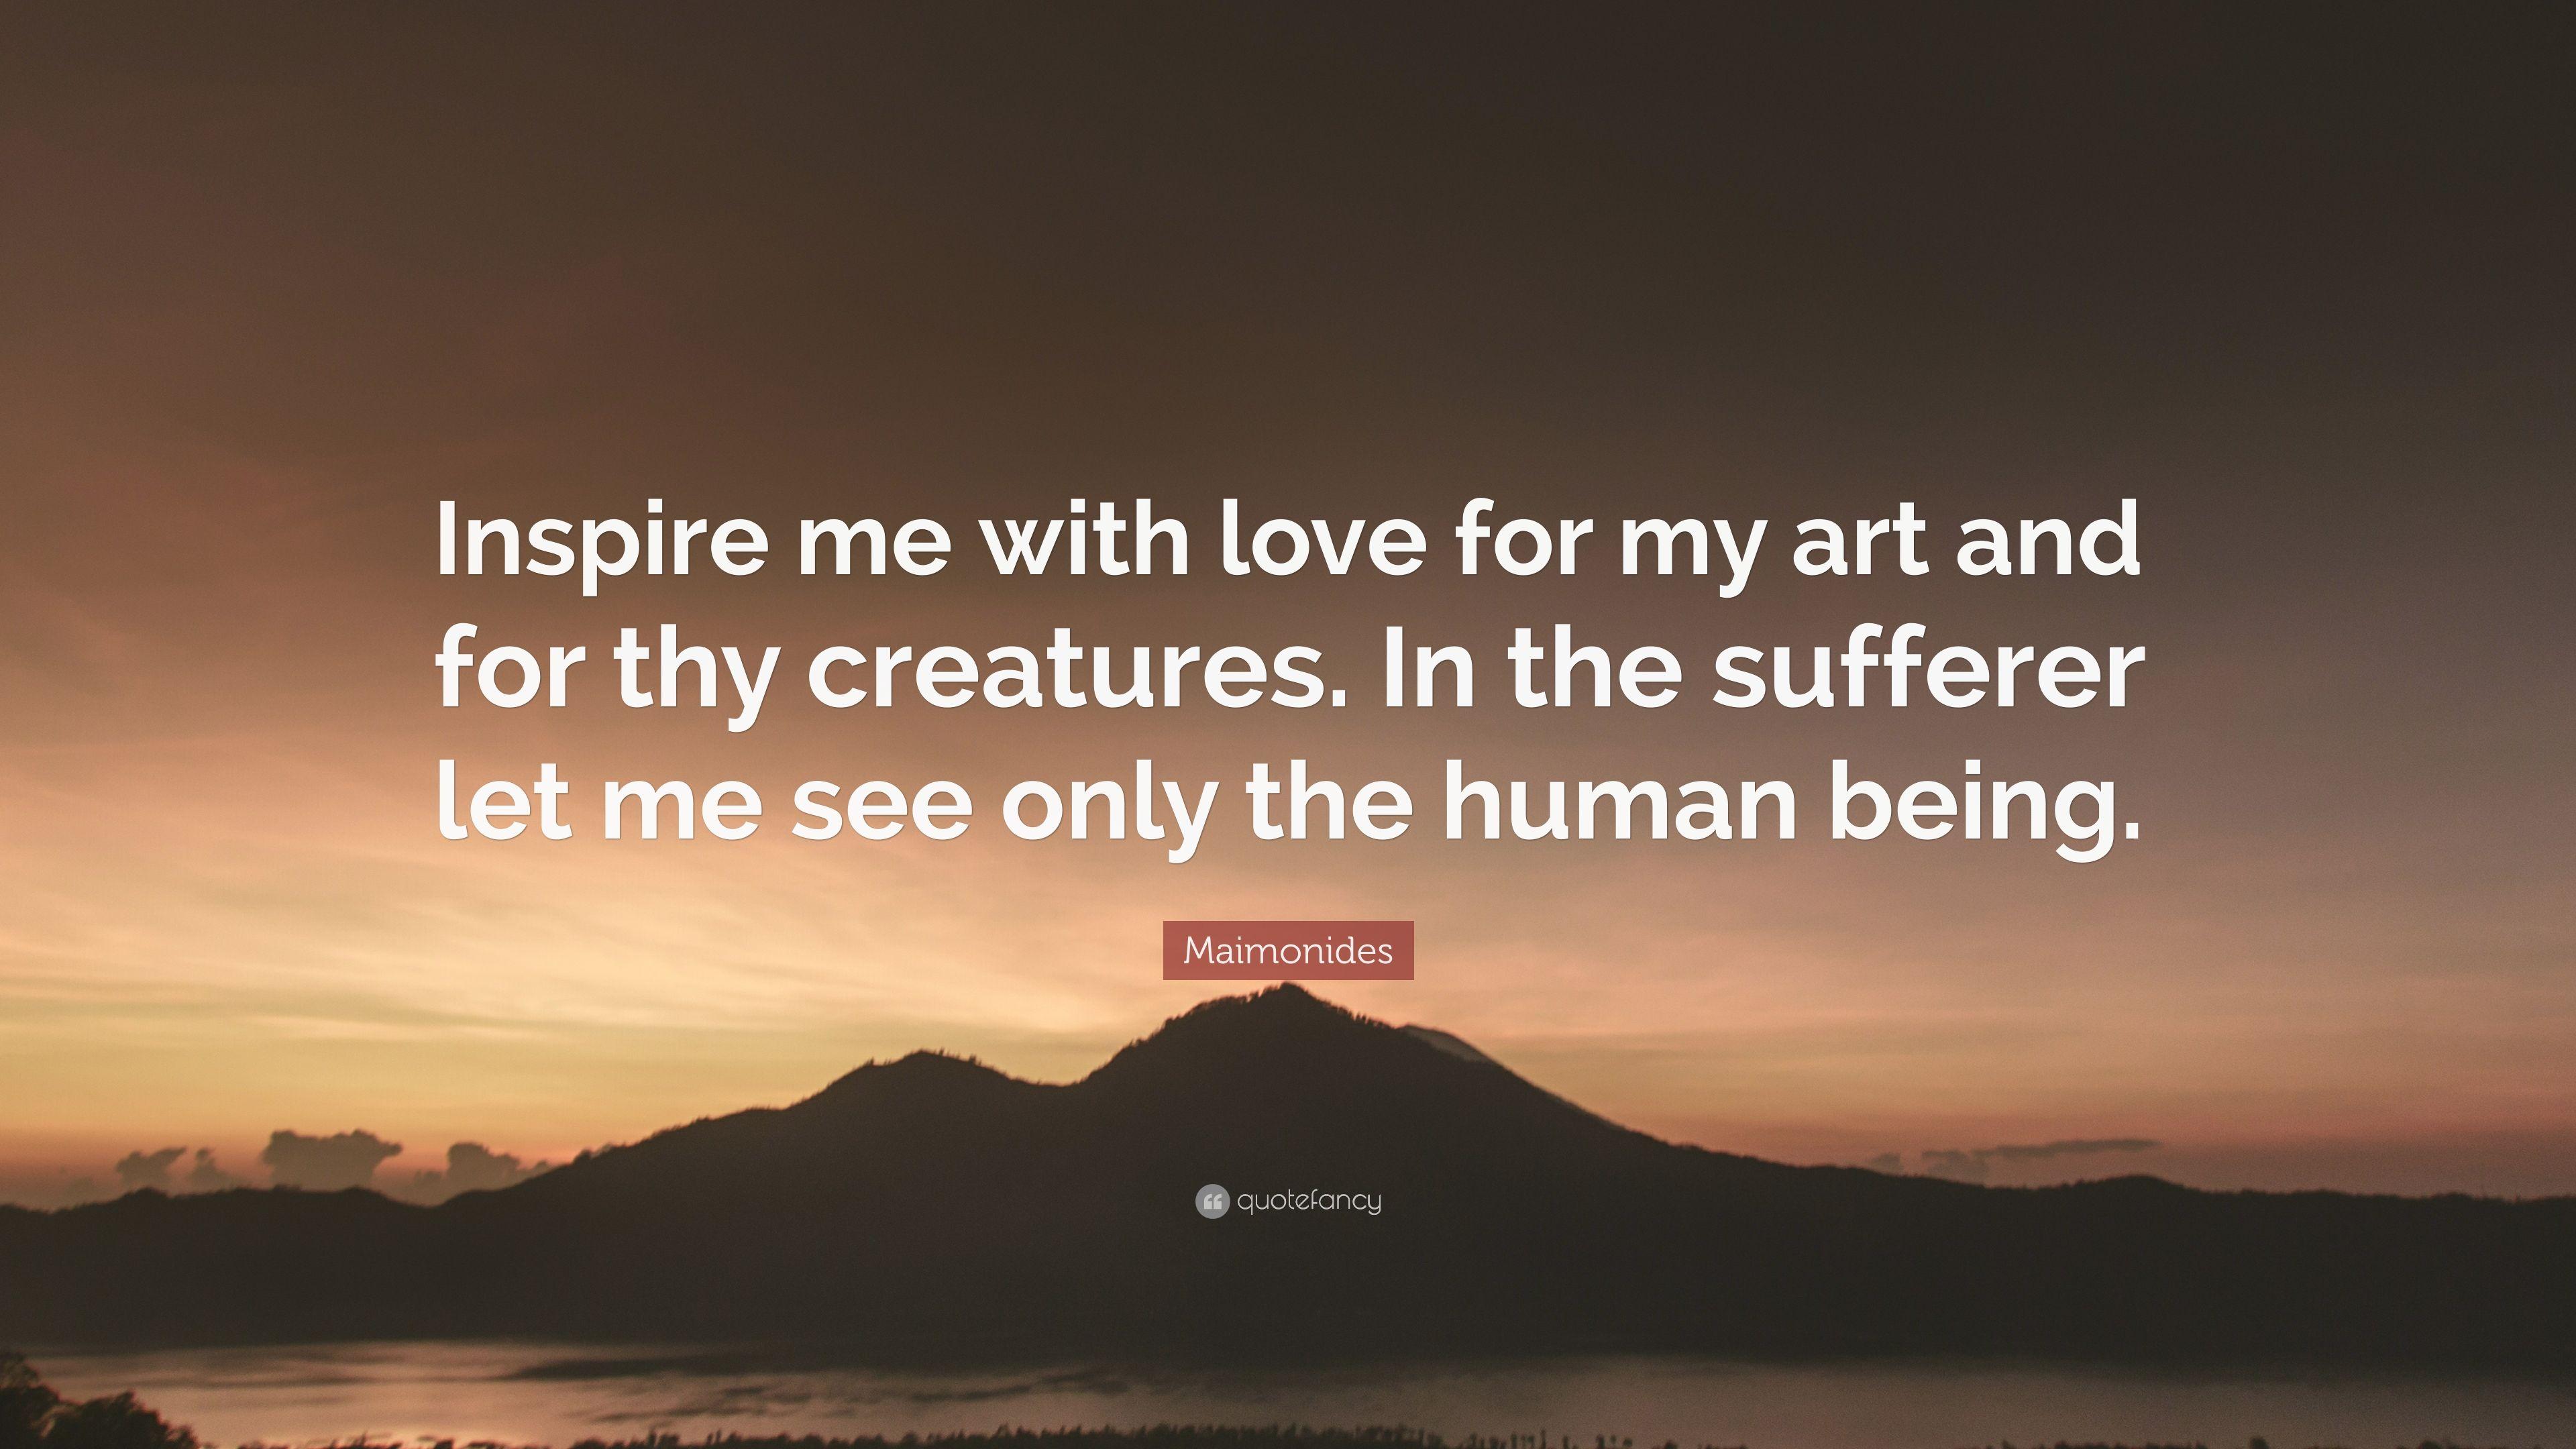 Maimonides Quote: “Inspire me with love for my art and